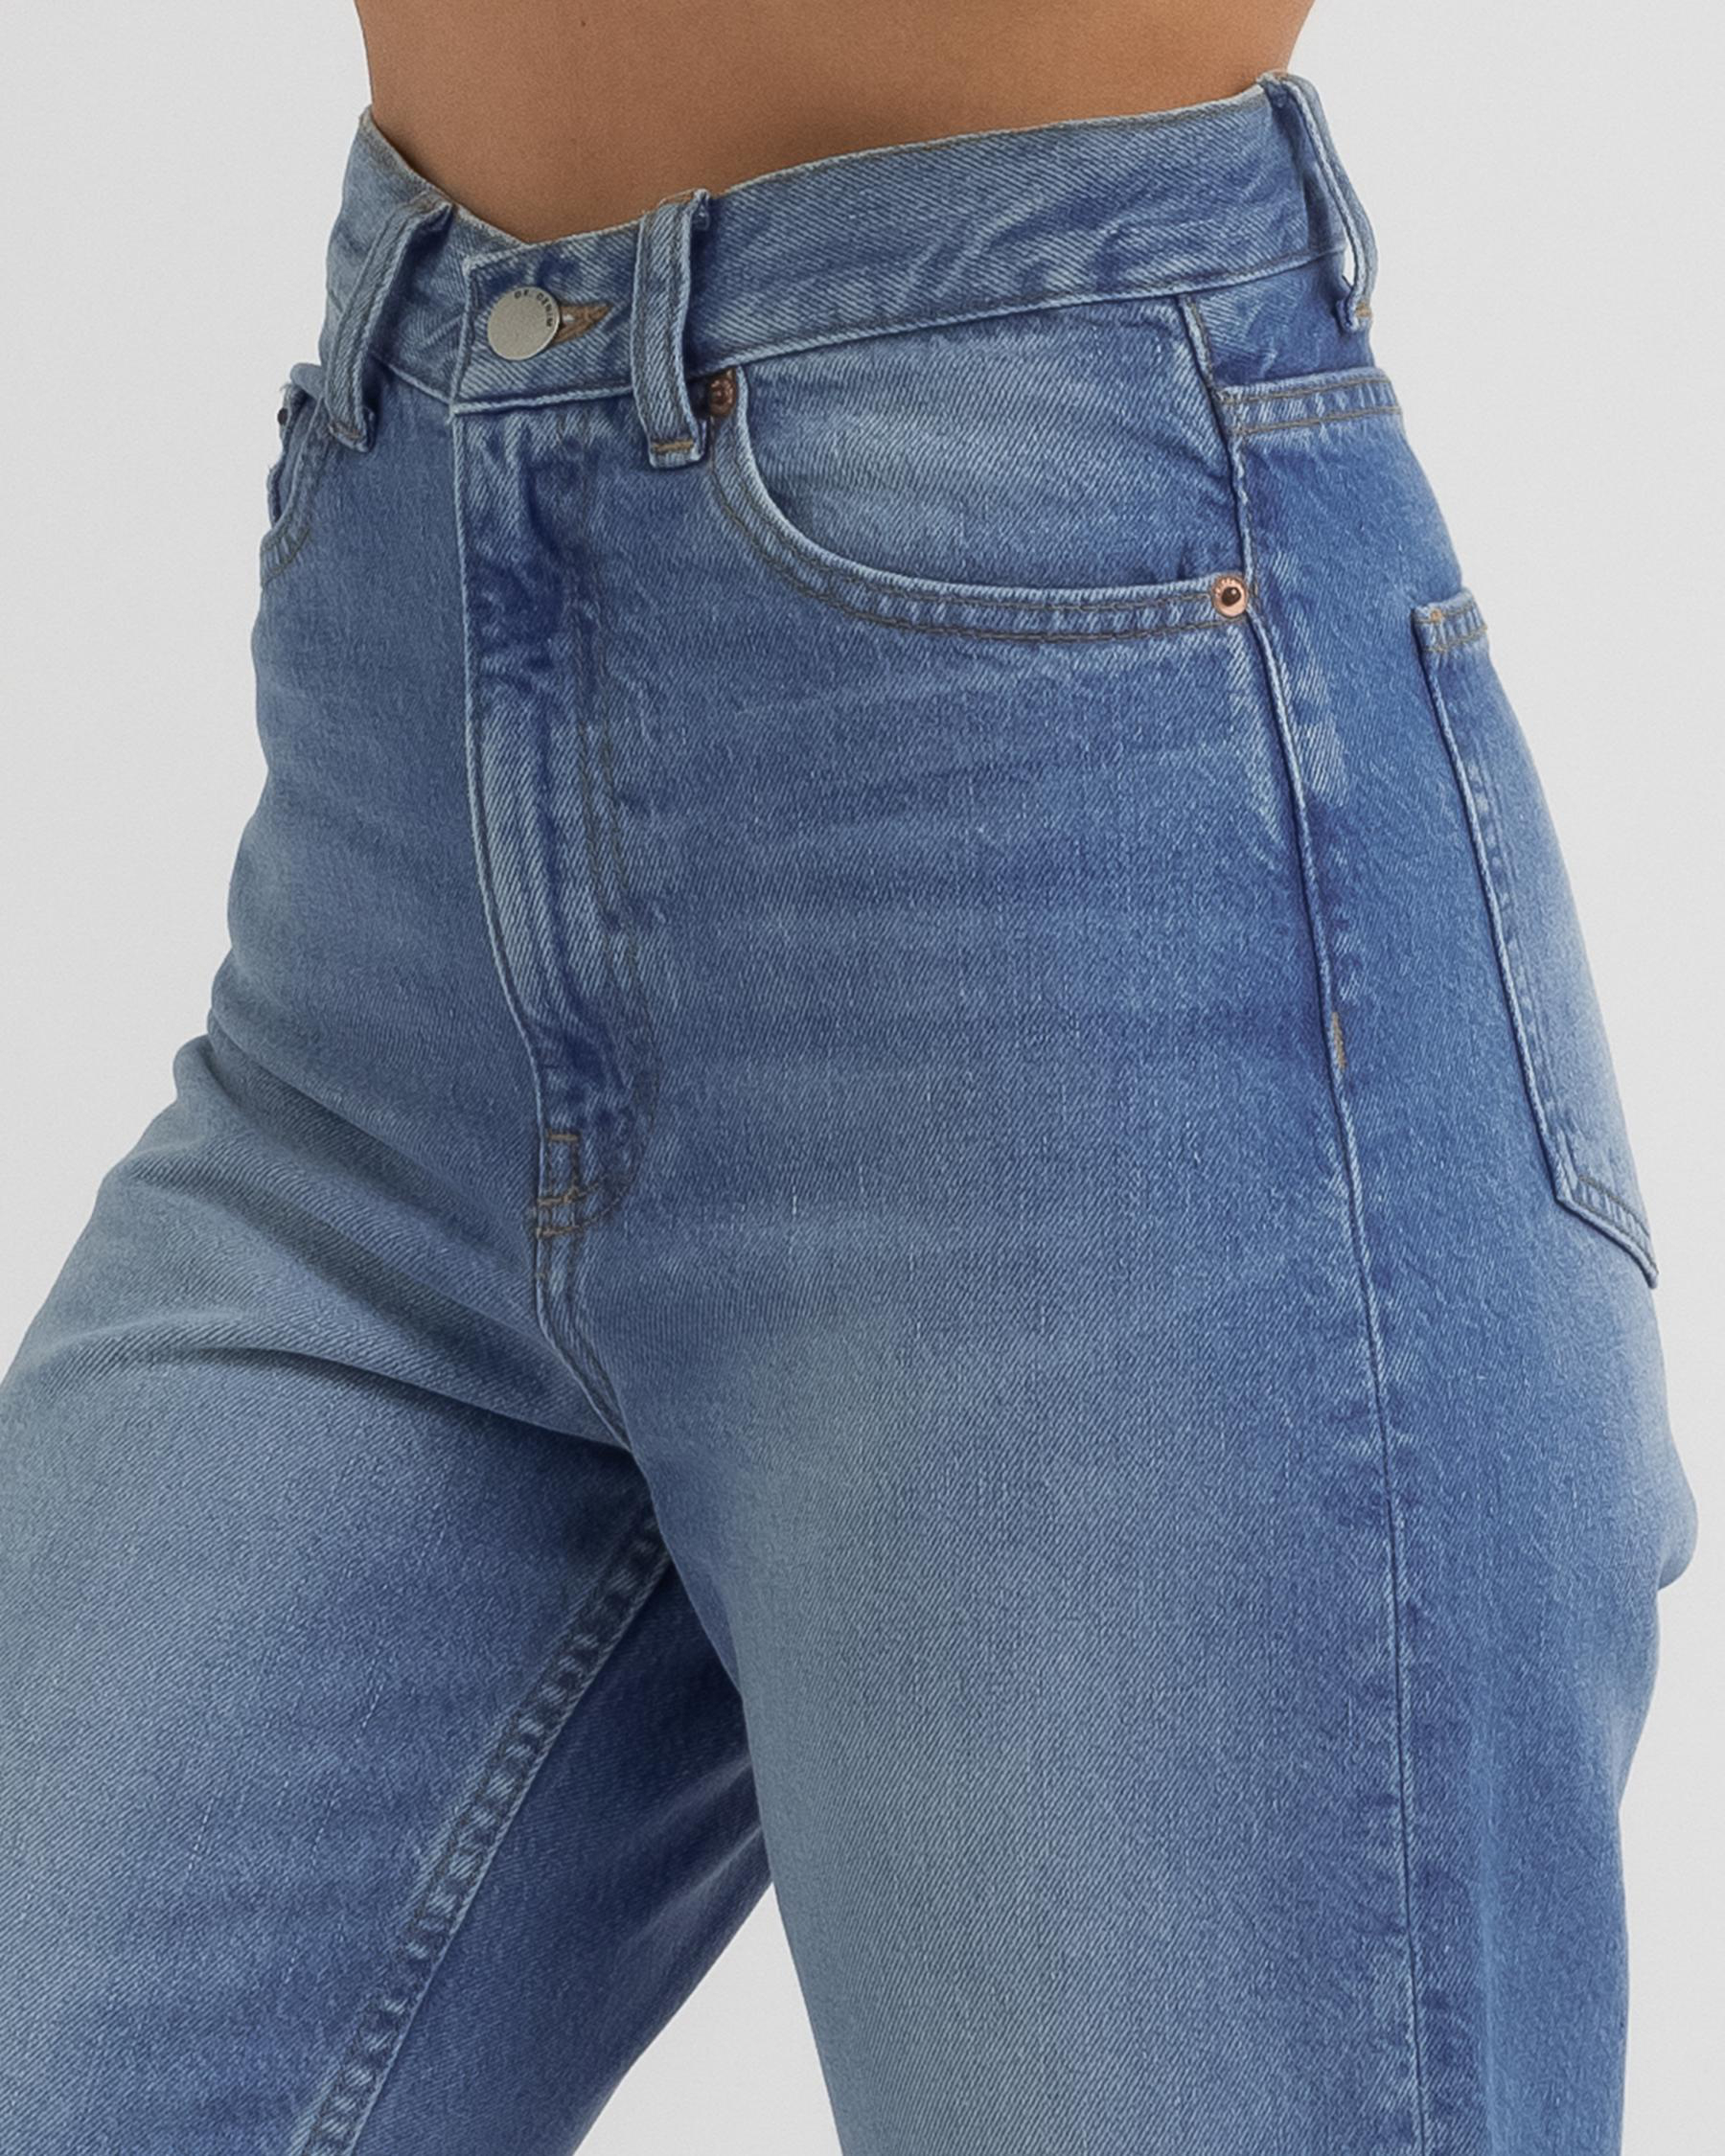 Dr Denim Echo Jeans In Empress Blue Ripped - Fast Shipping & Easy ...